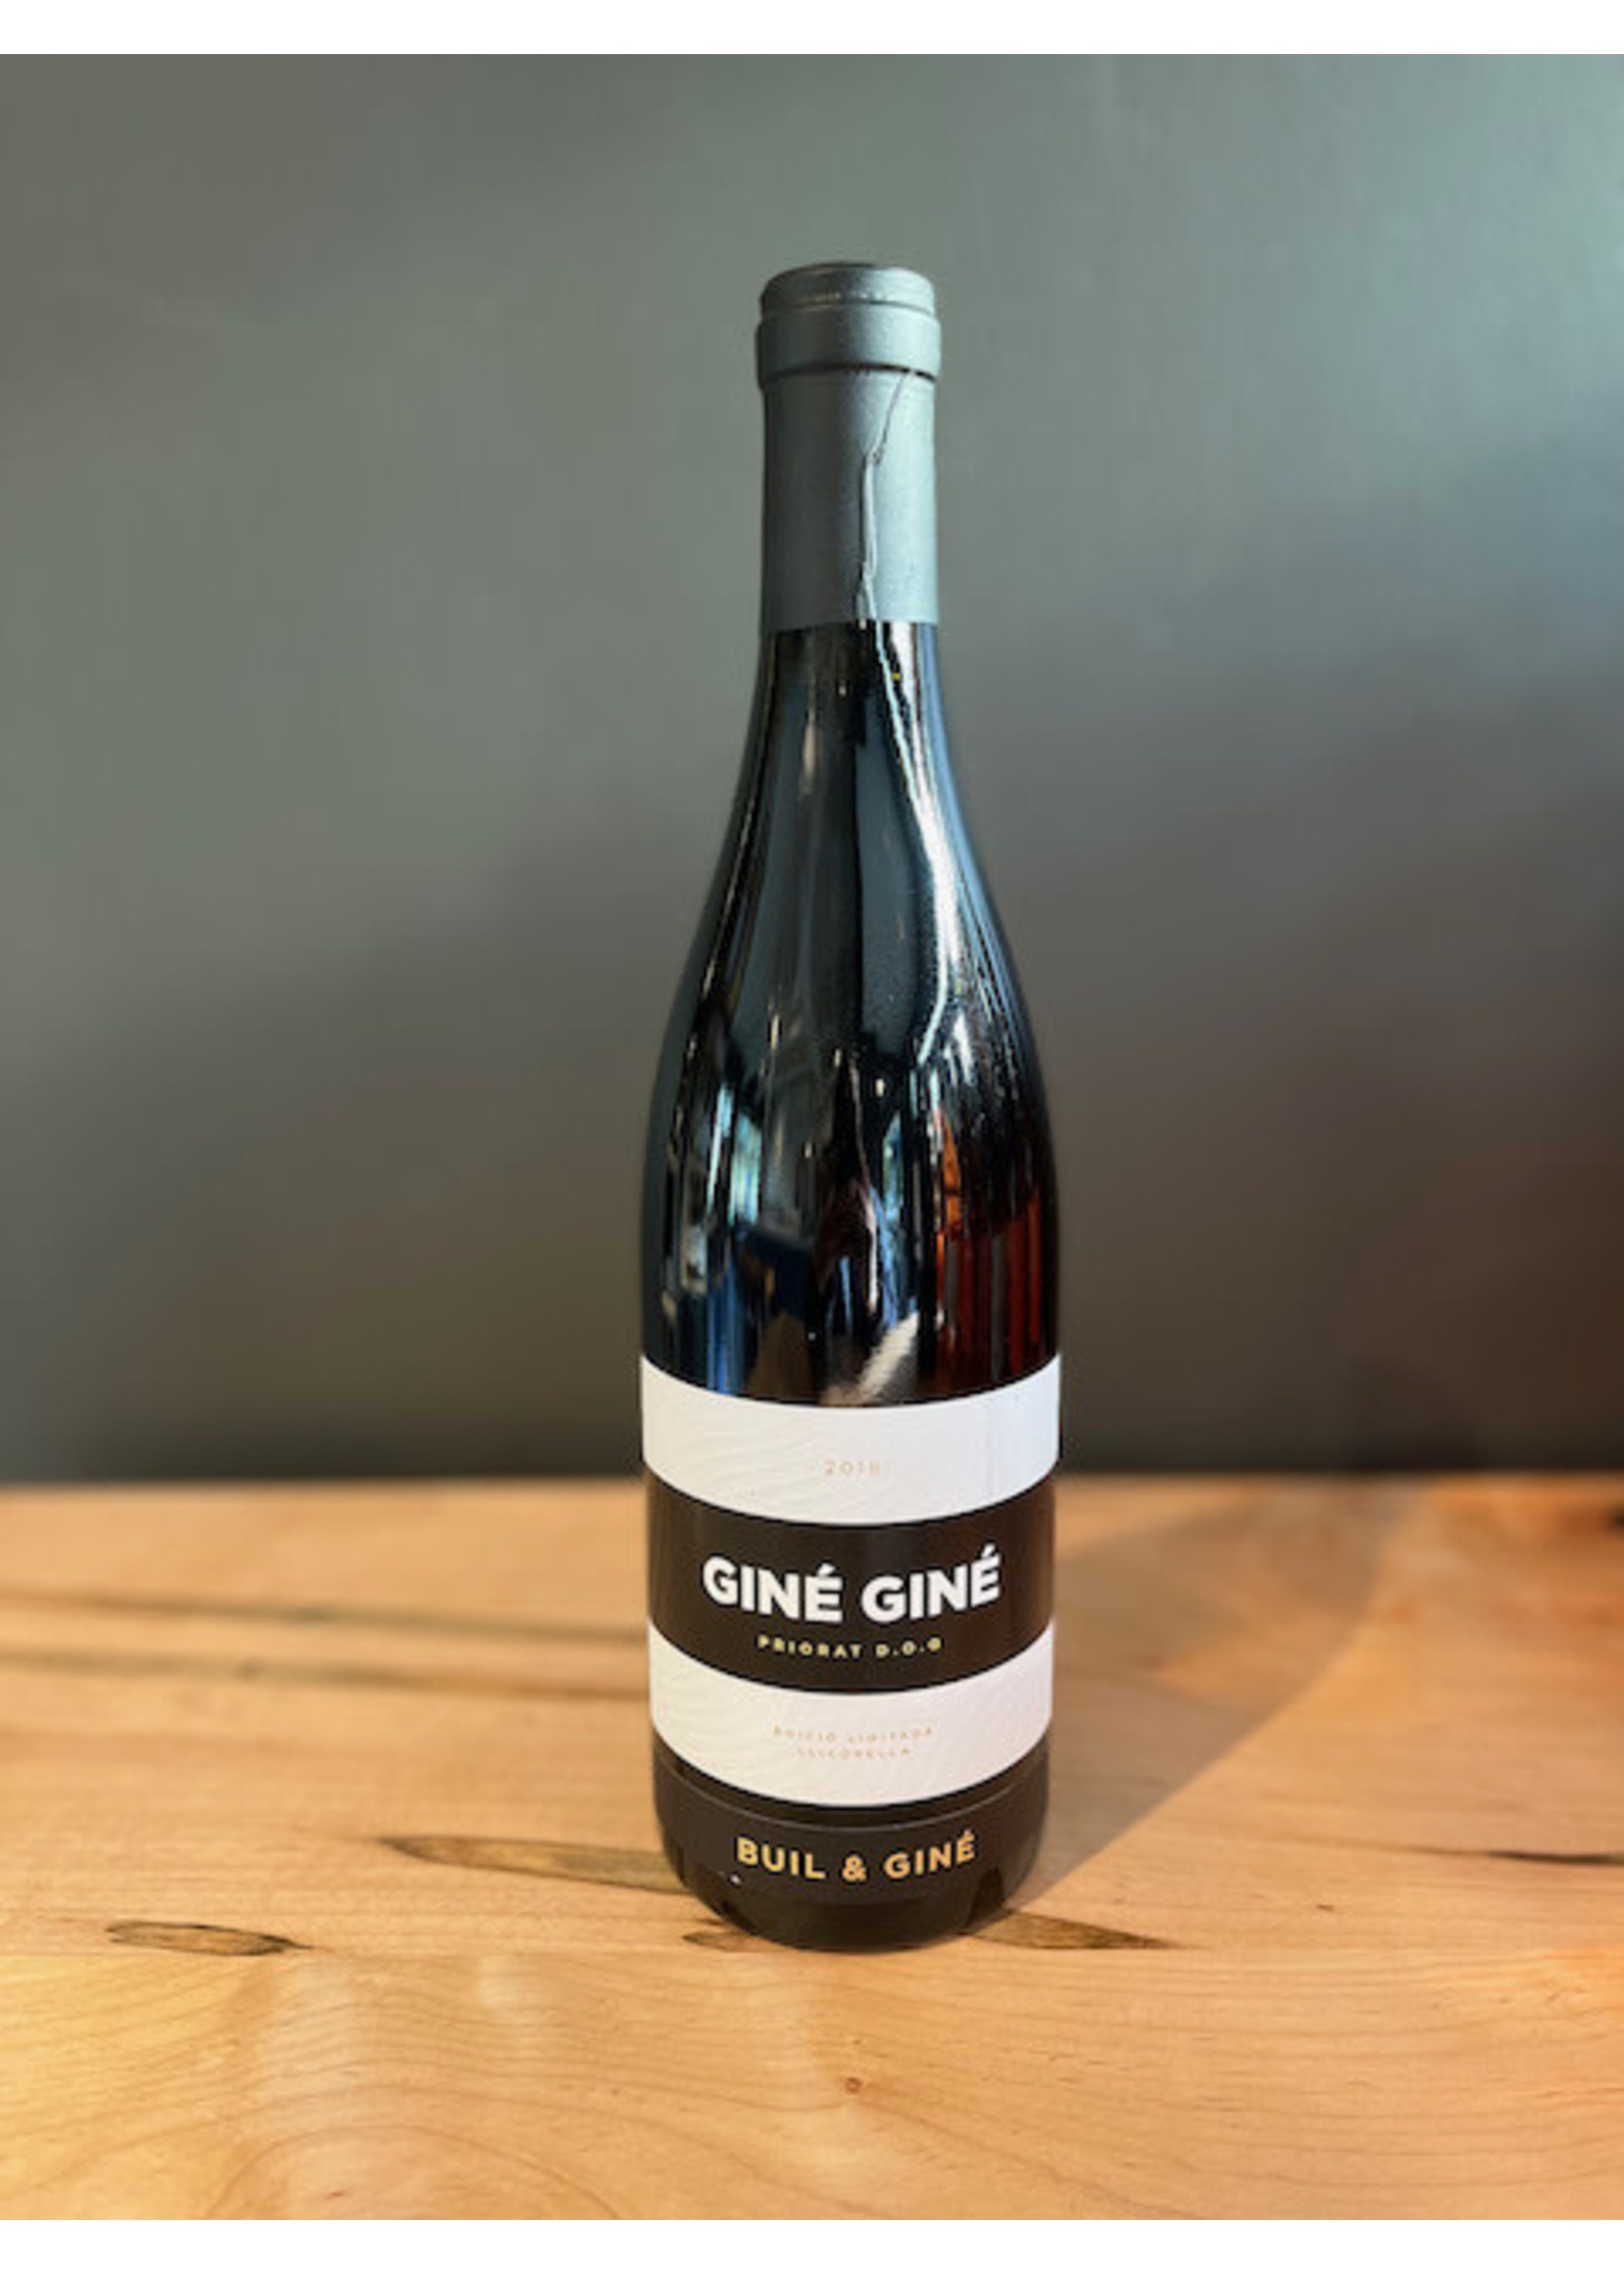 Buil y Gine - Gine Gine Priorat 2019